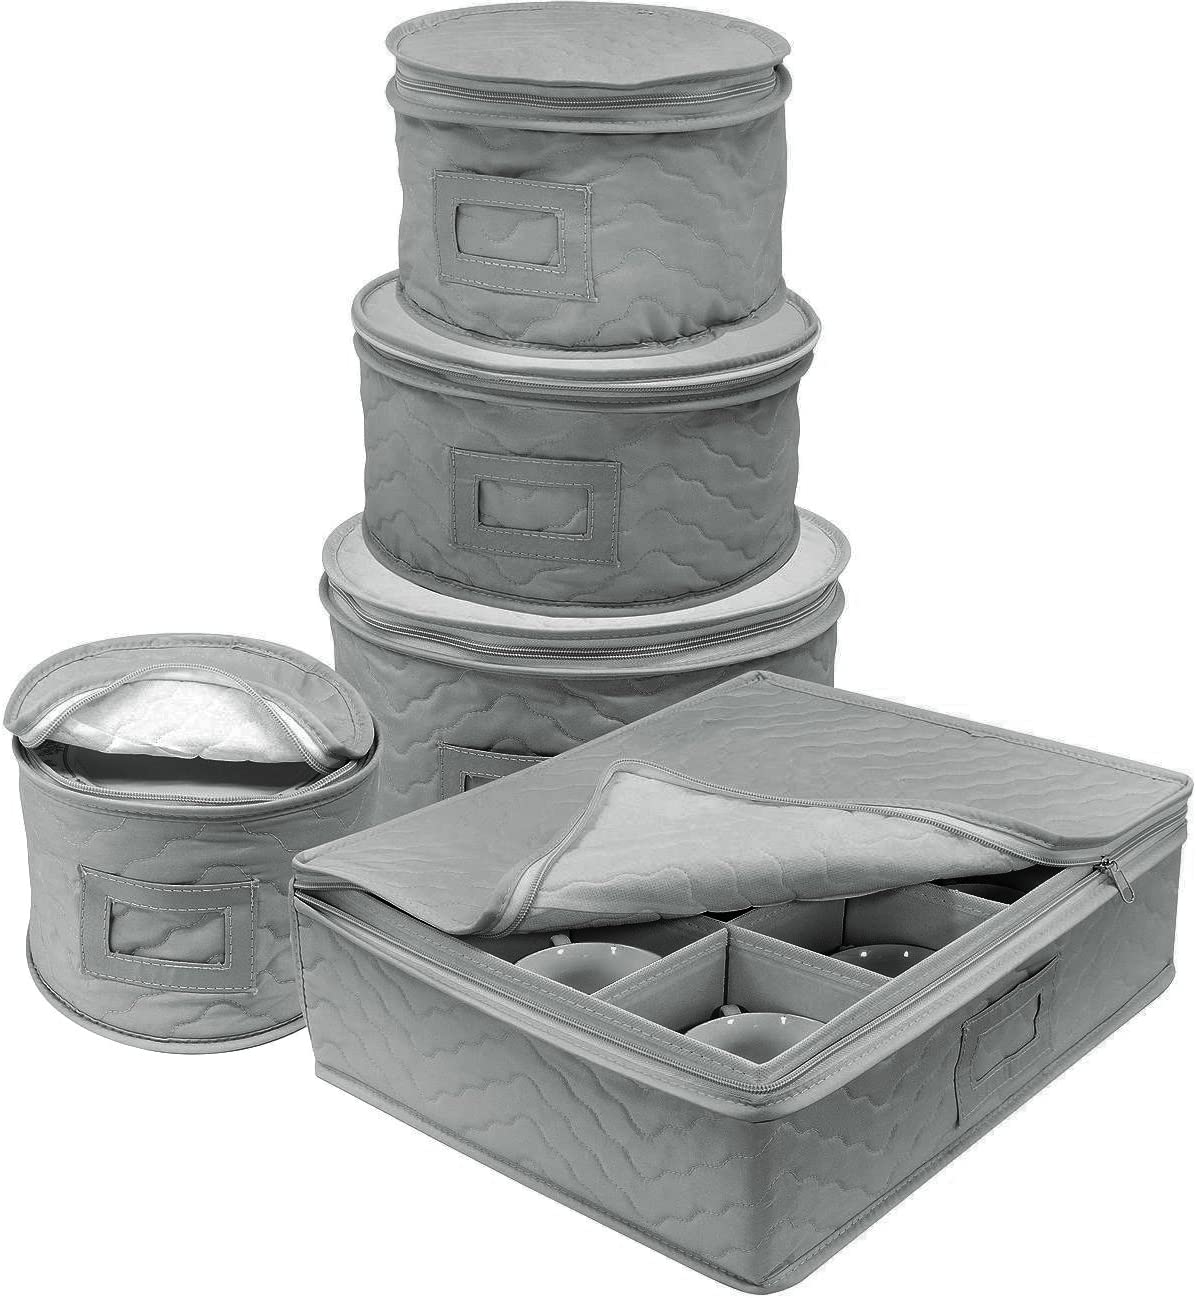 China Storage Set for Dinnerware Storage and Transport Grey Felt Plate Dividers Included Protects Dishes Cups and Mugs 